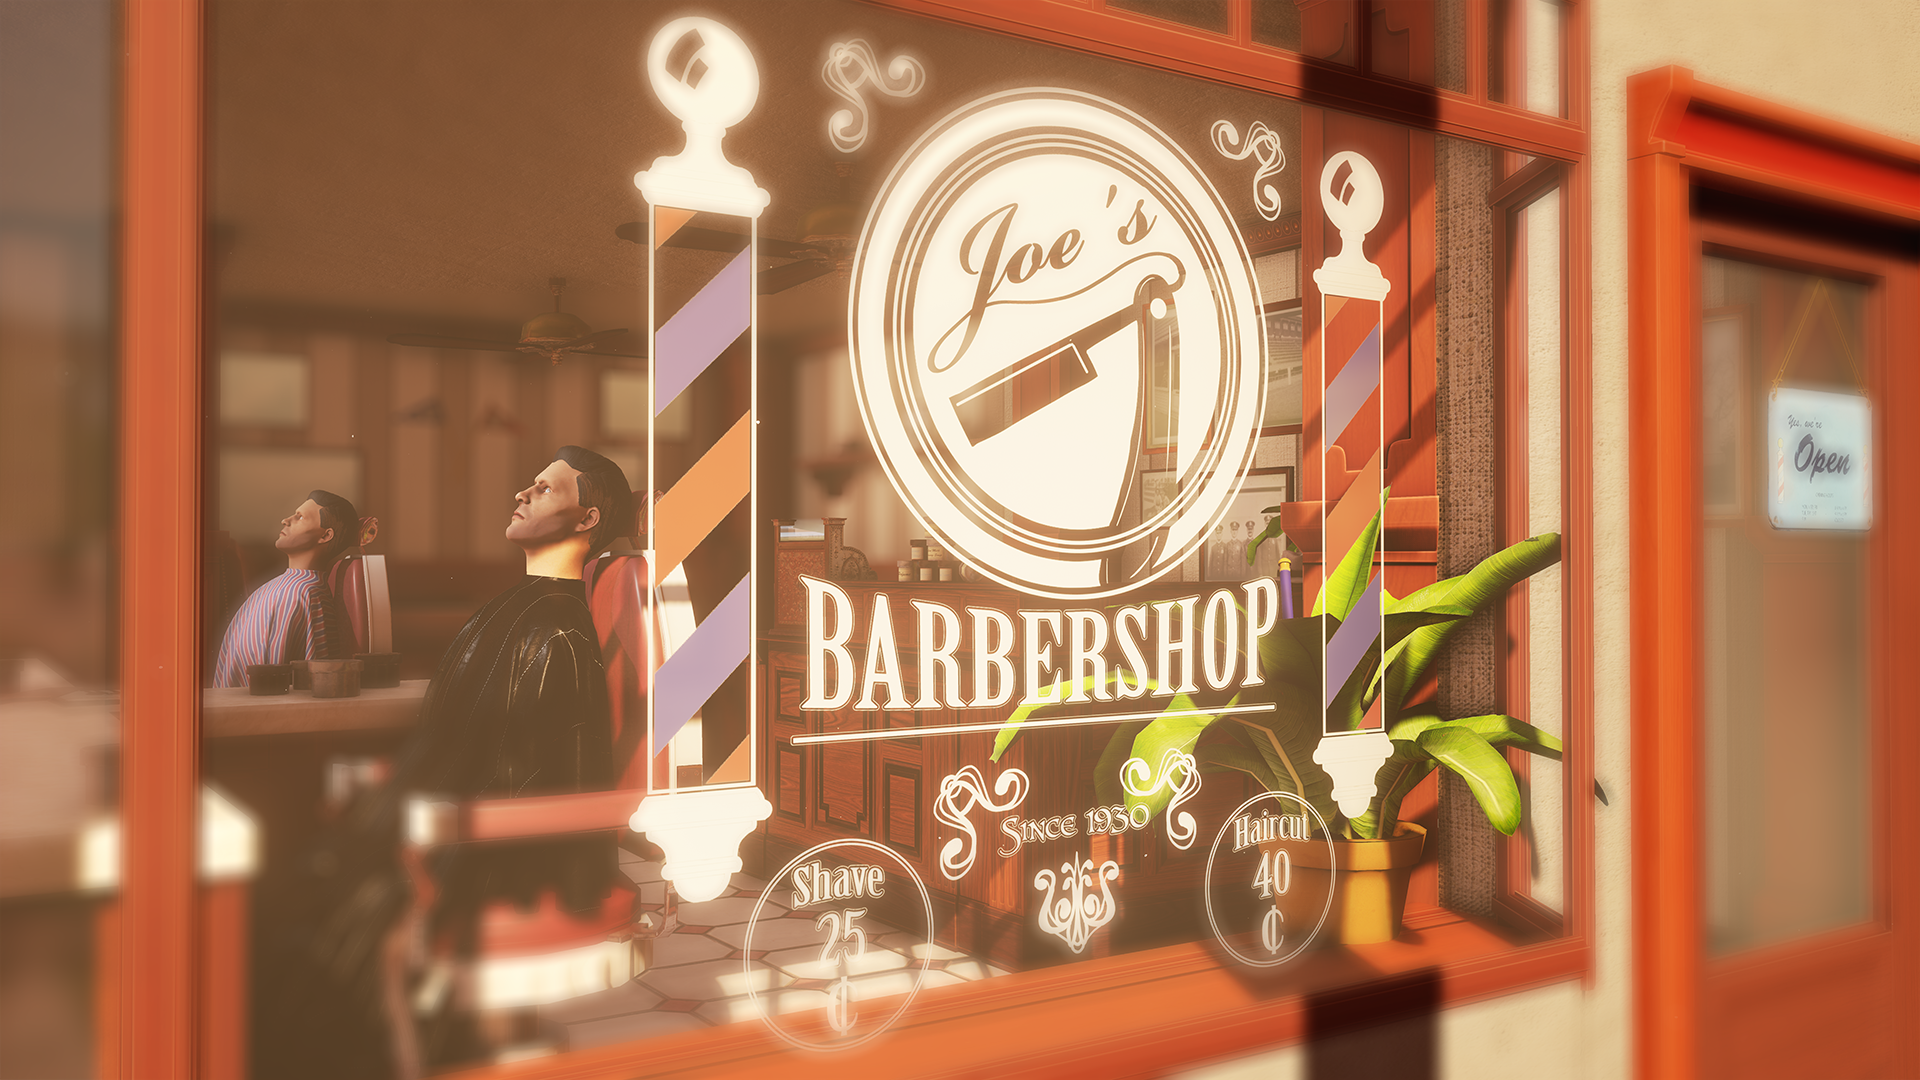 The Barber Shop – Student Project Game